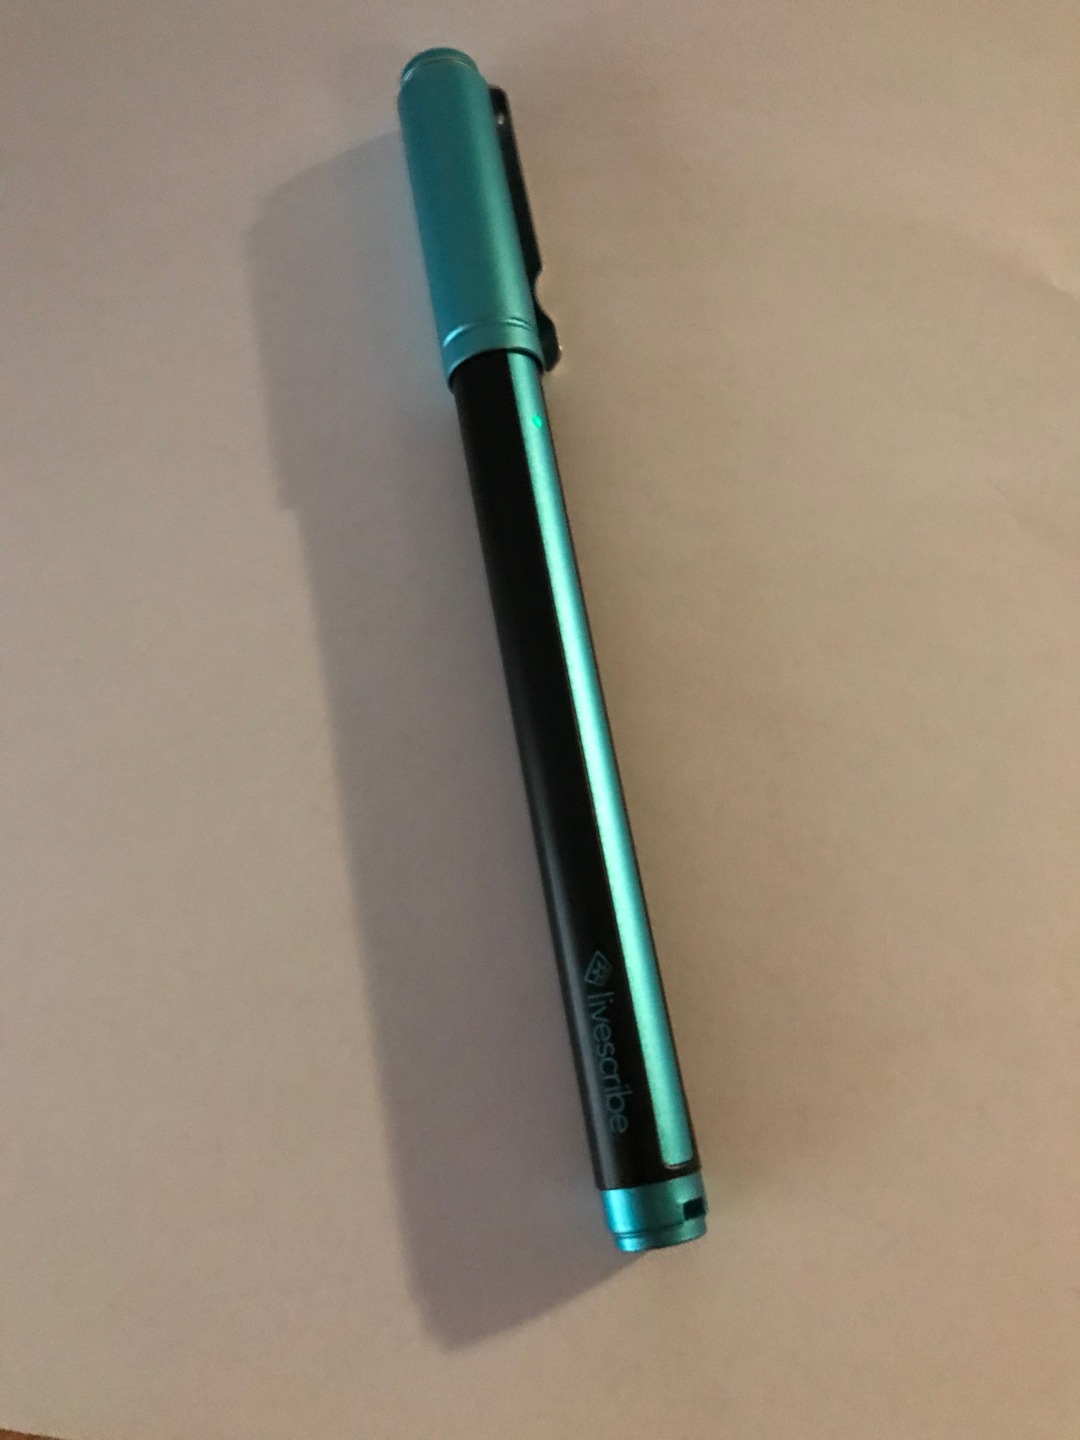 A picture of a Livescribe pen with too much shadow and not enough contrast.